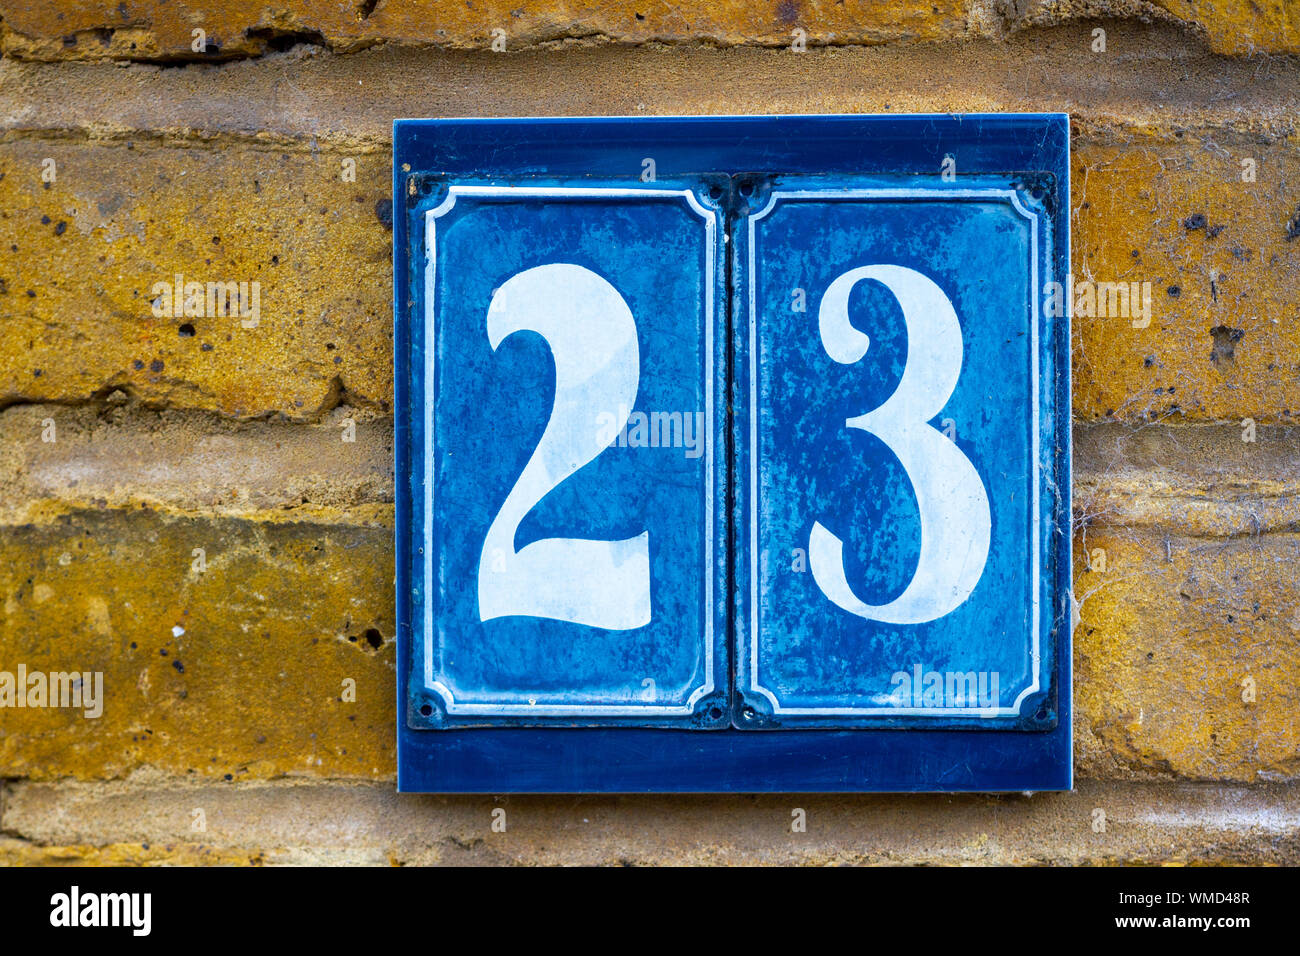 House number 23 in blue tiles Stock Photo